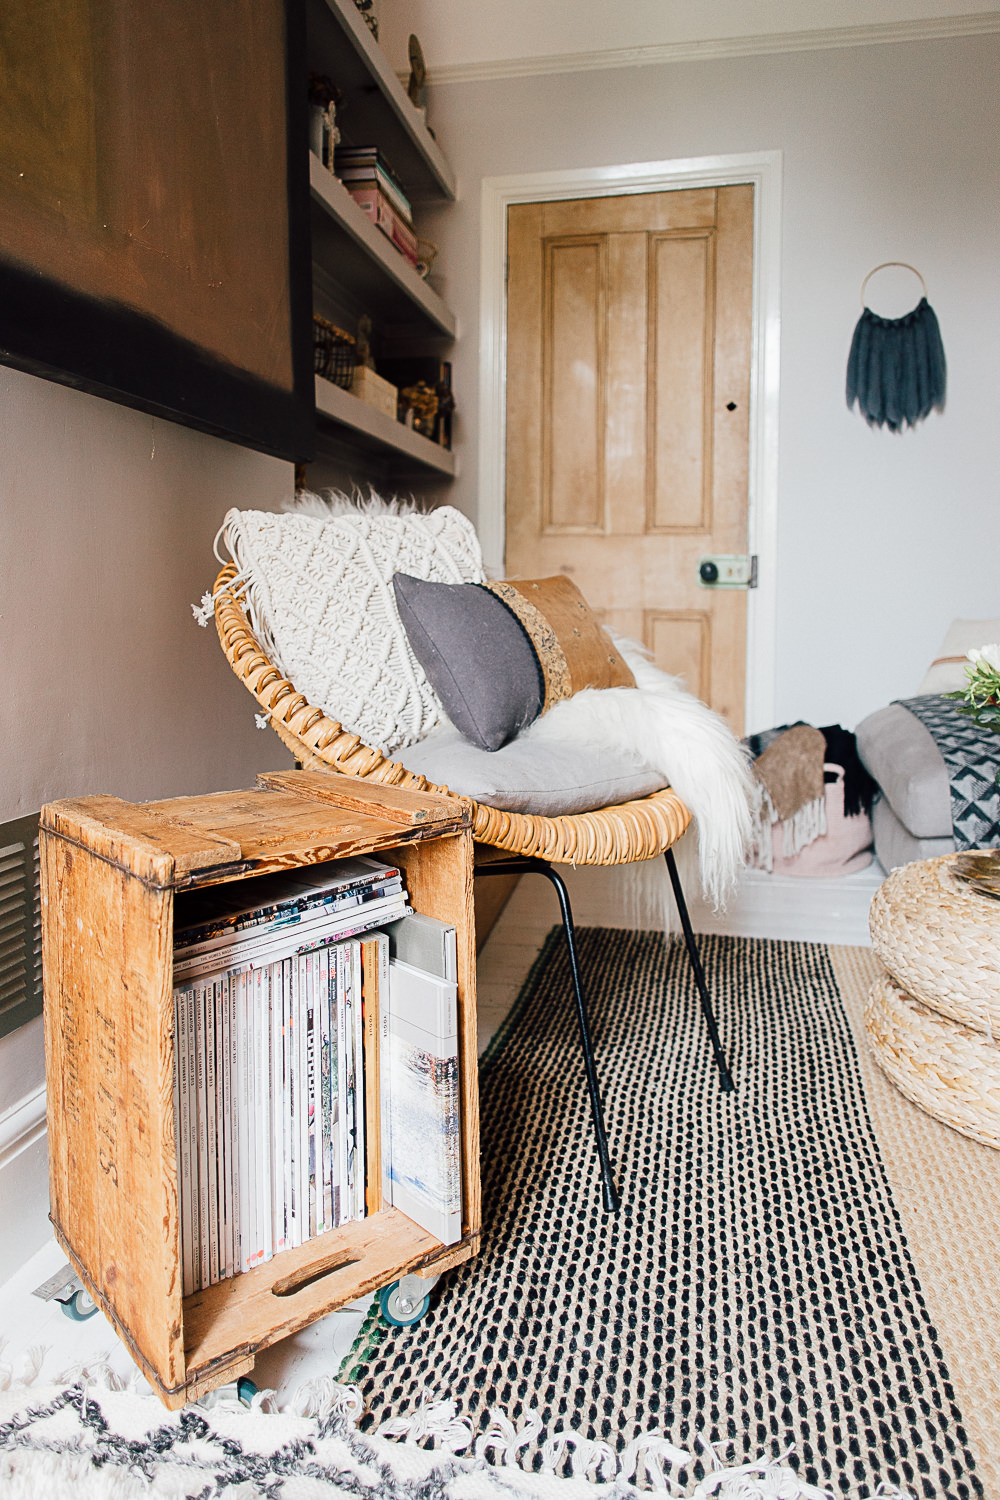 Rattan chair and vintage crate